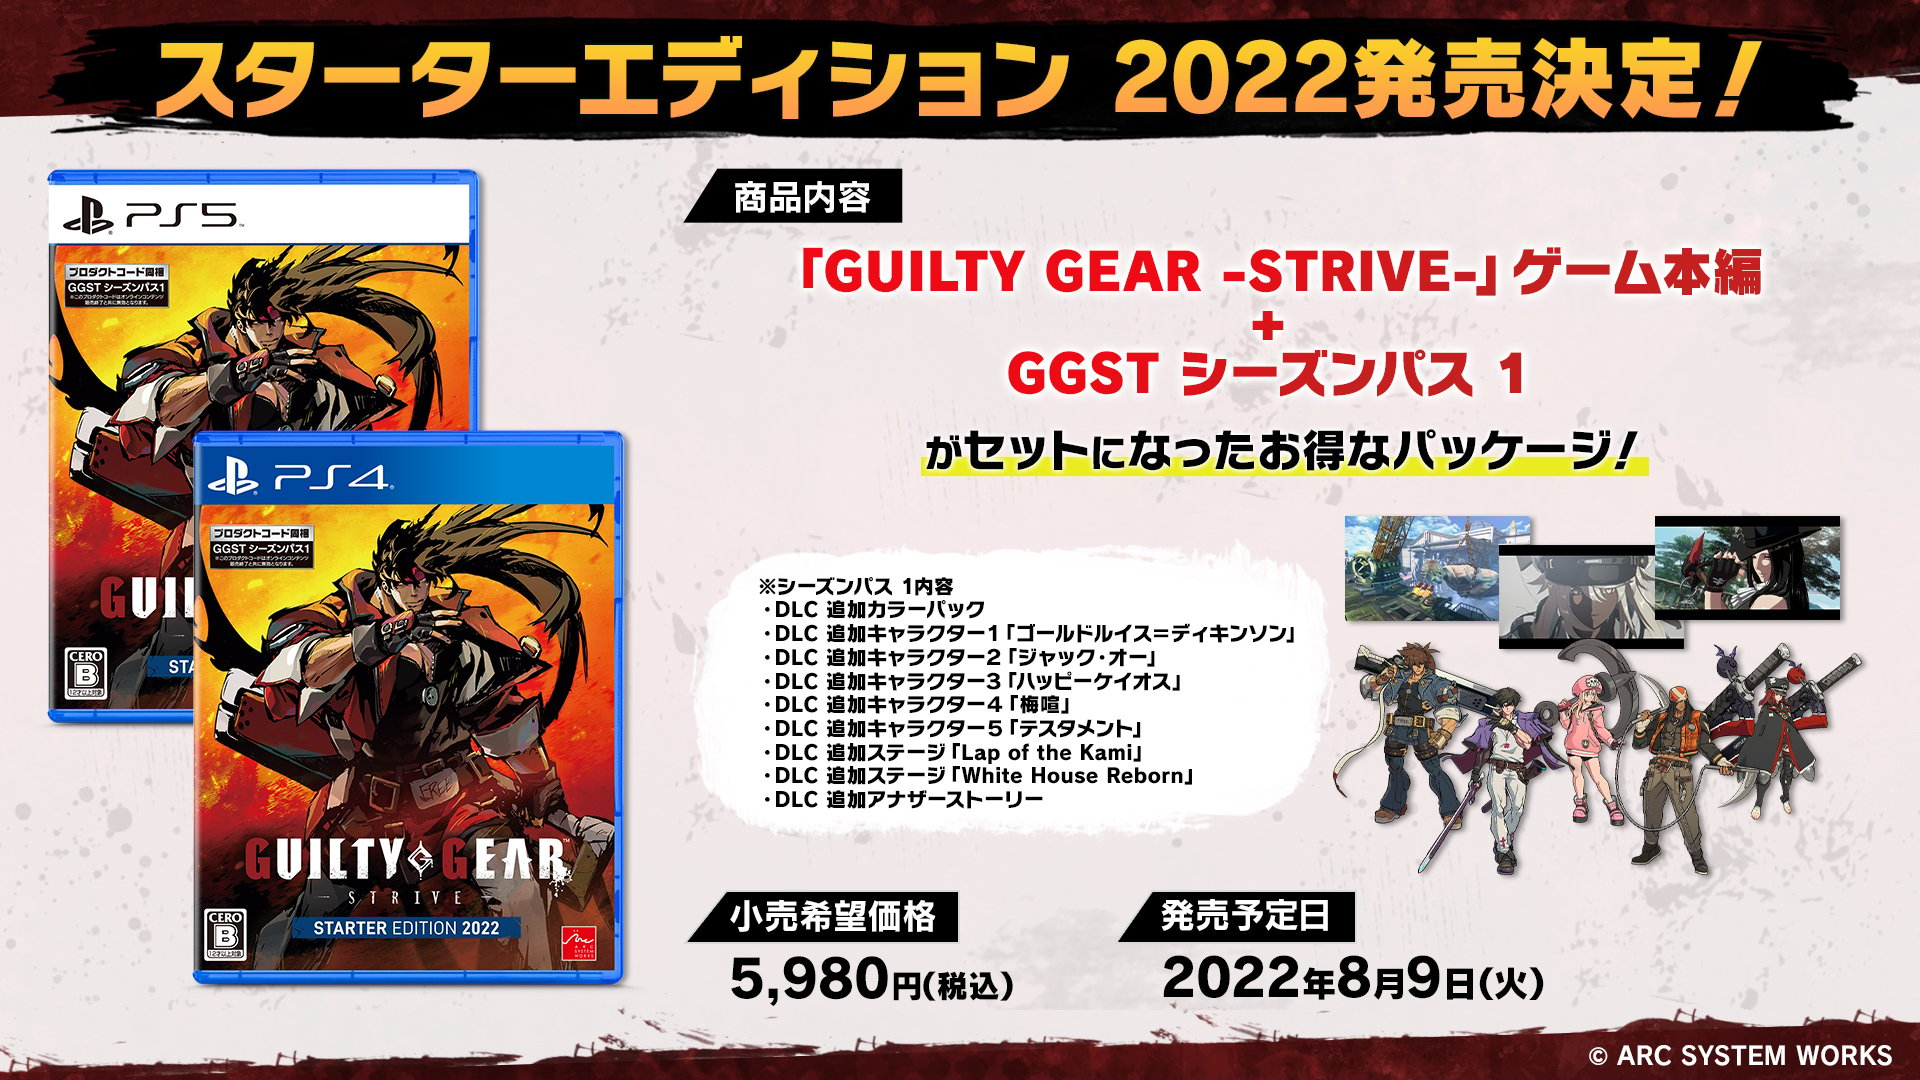 8/10 Patch] Guilty Gear Collab is back!